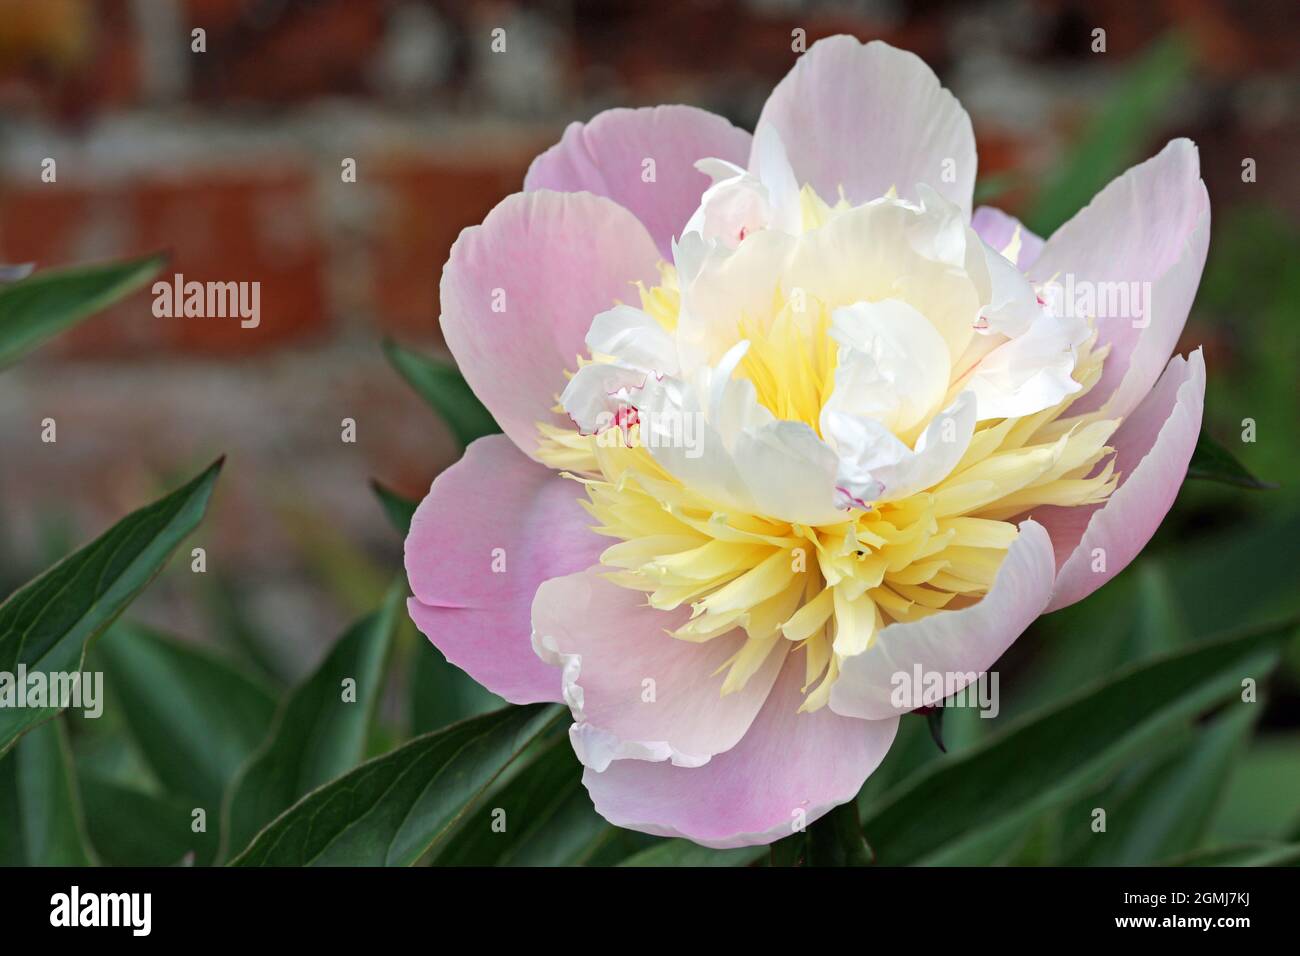 Single pink peony, Paeonia lactiflora of unknown variety, flower in close up with a white and yellow centre and a background of blurred leaves and a b Stock Photo